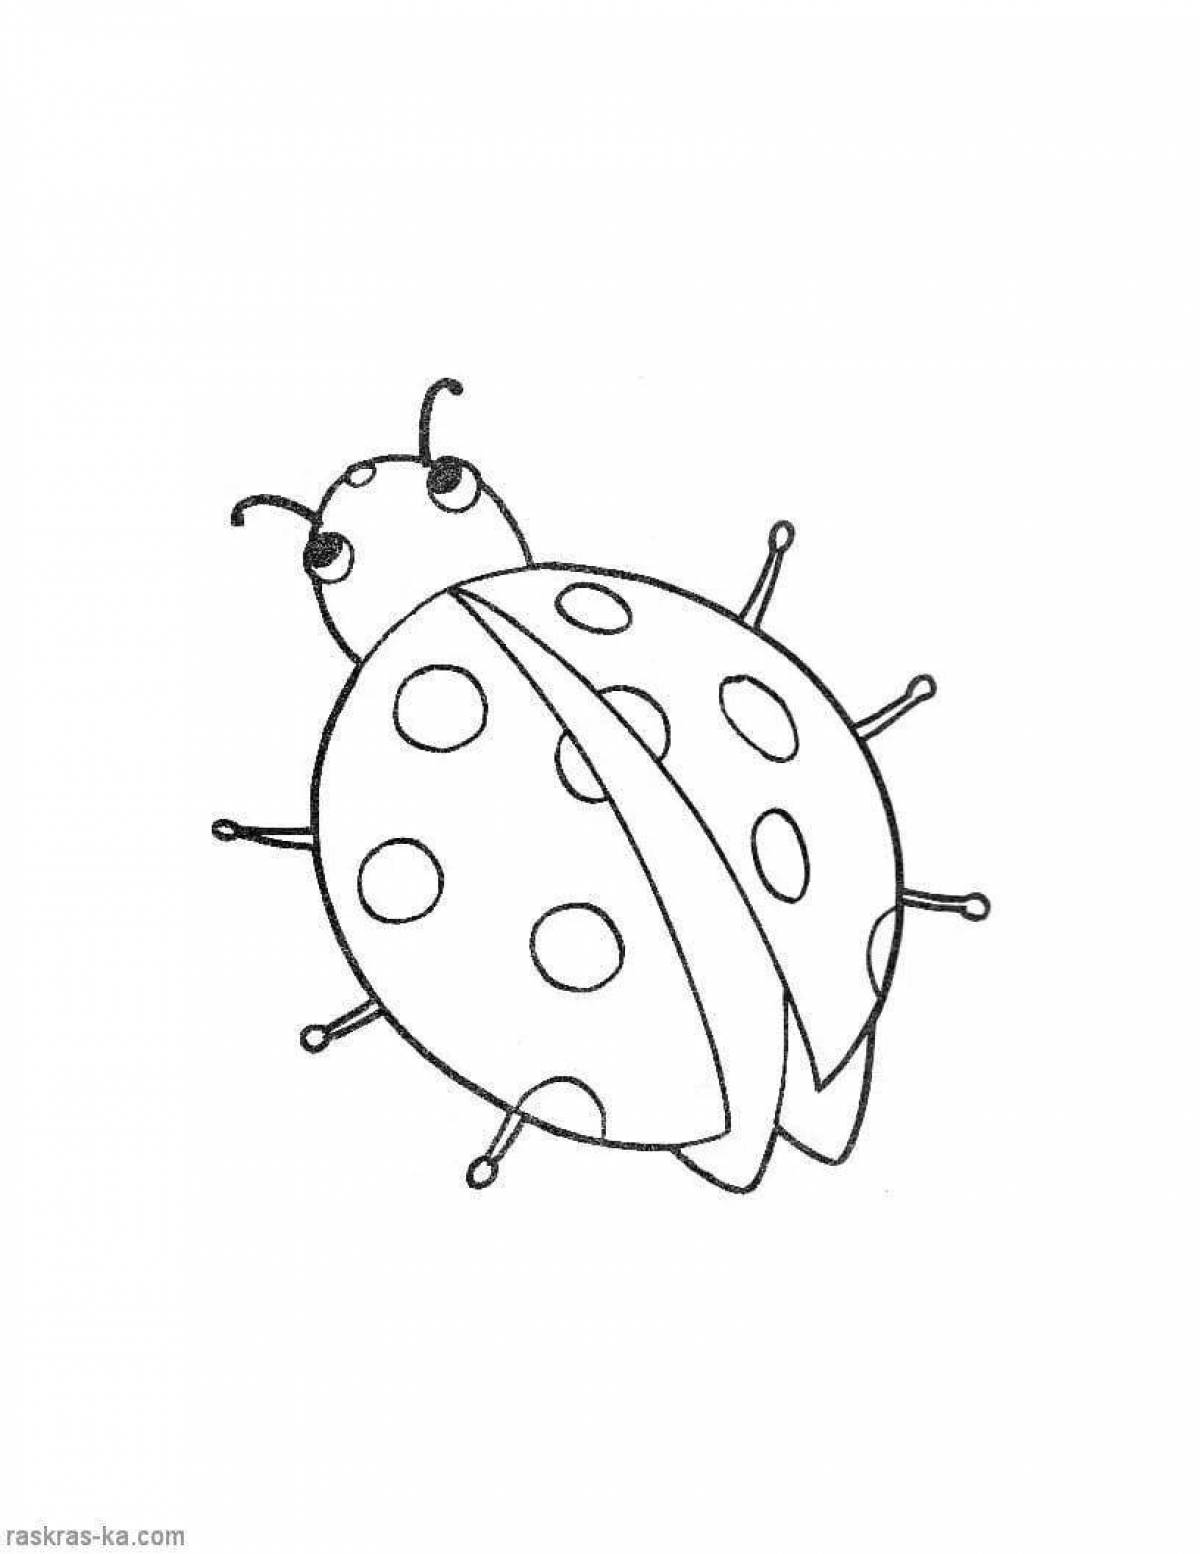 Outstanding ladybug coloring page for kids